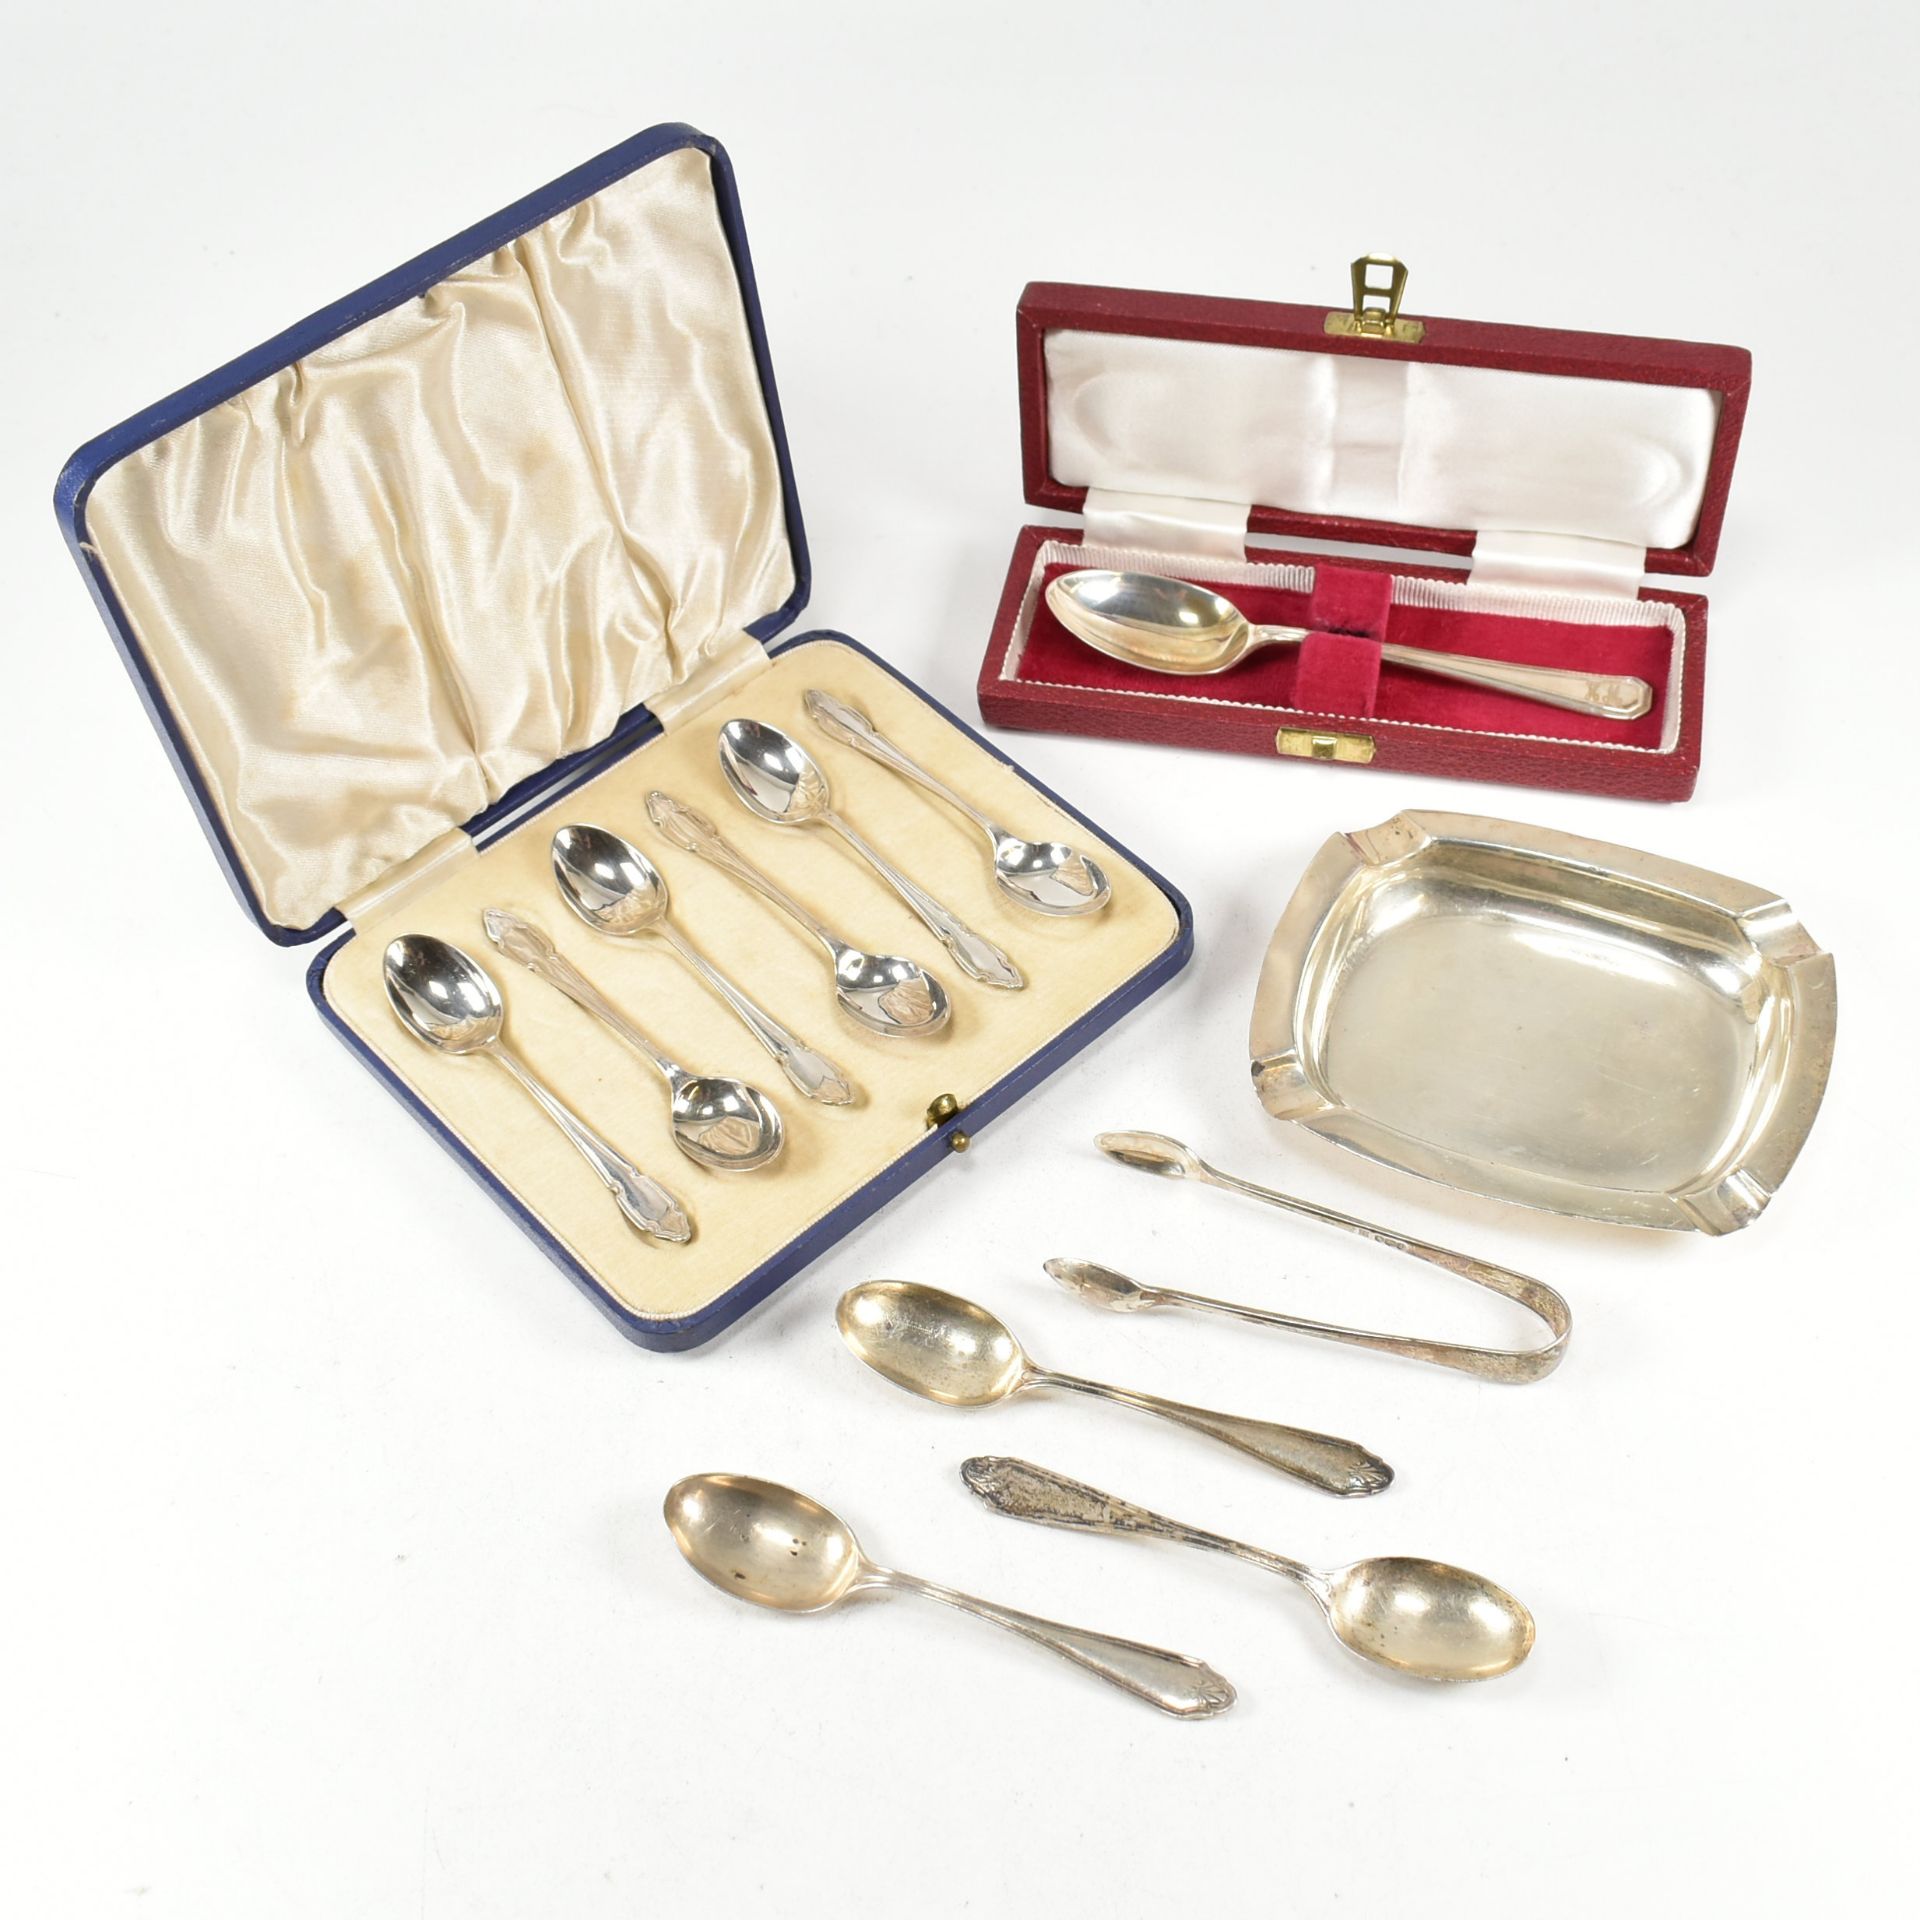 EARLY 20TH CENTURY HALLMARKED SILVER FLATWARE ITEMS